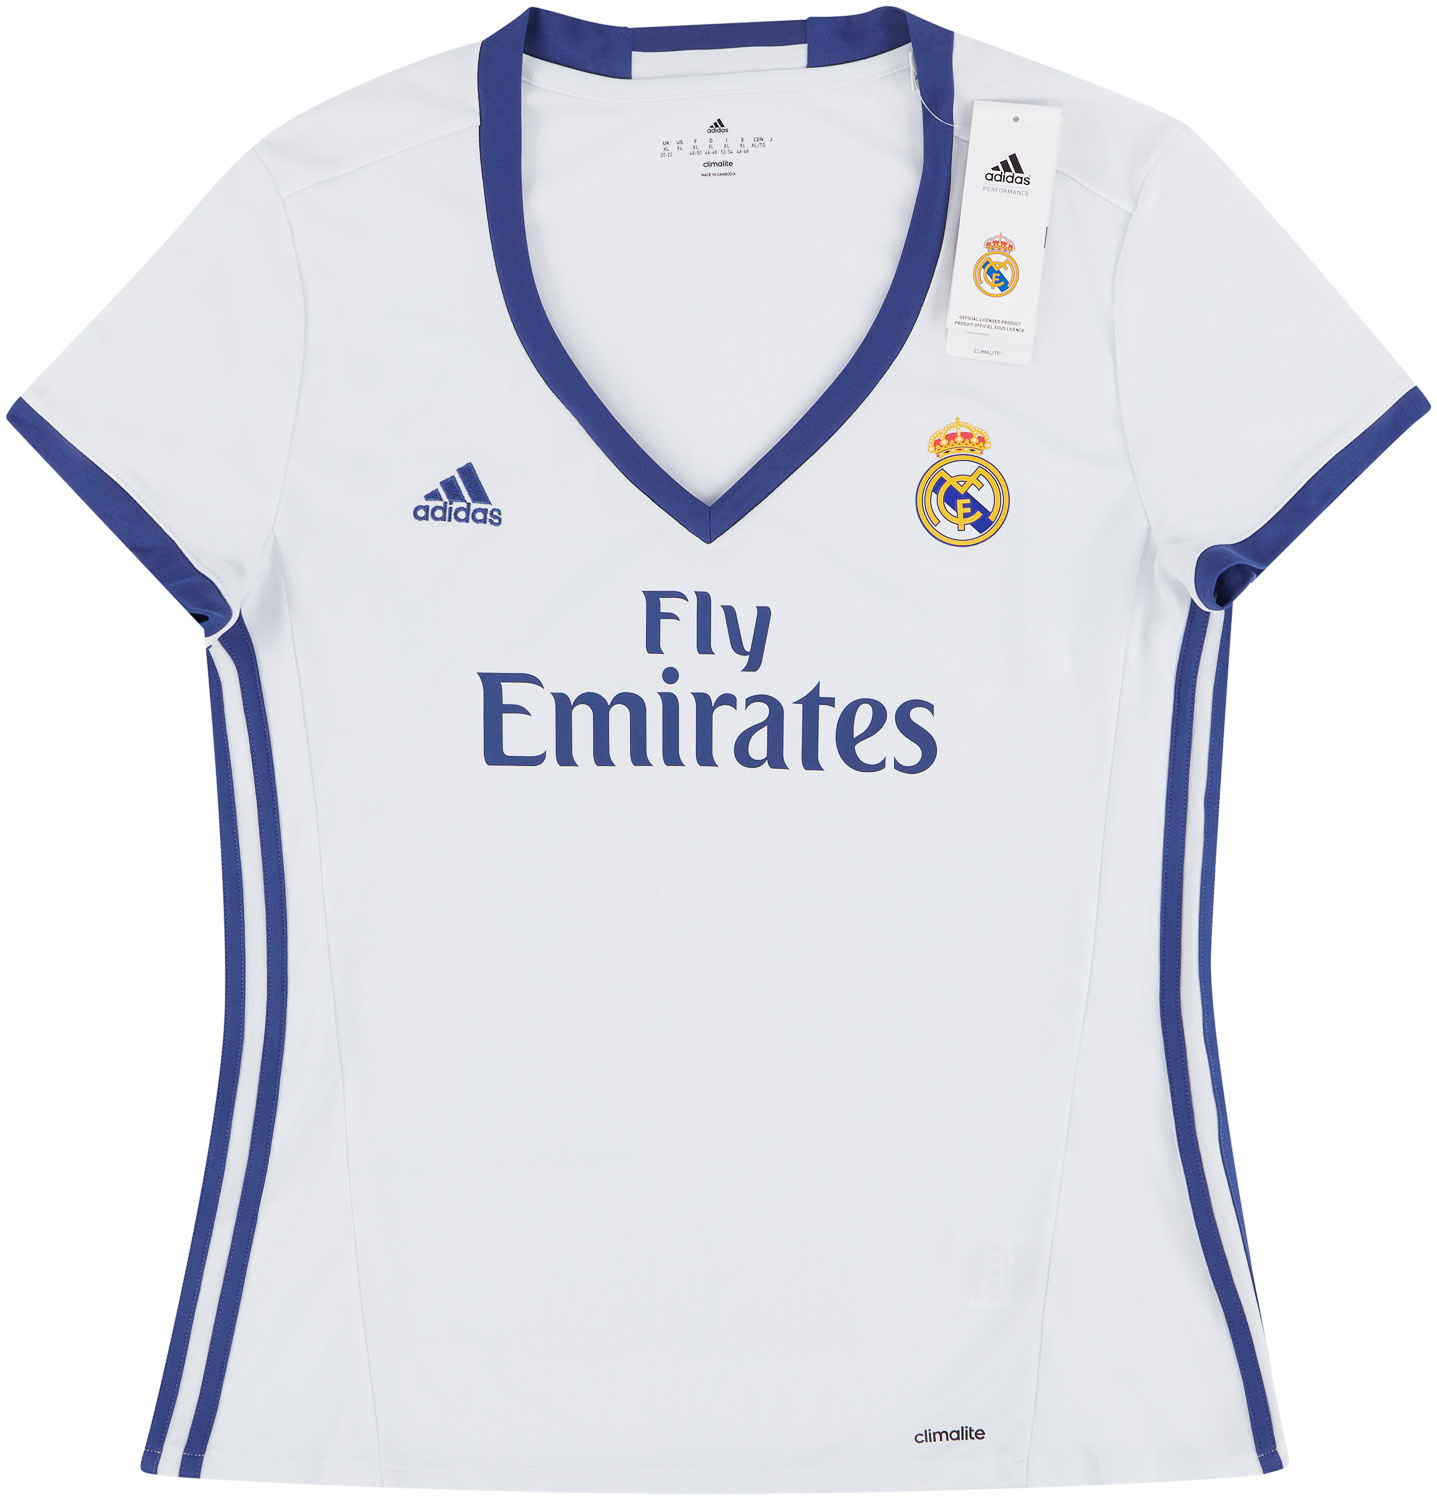 Blue 2016-17 Real Madrid Fly Emirates Player Issue Sponsor Patch for Shirt ... 